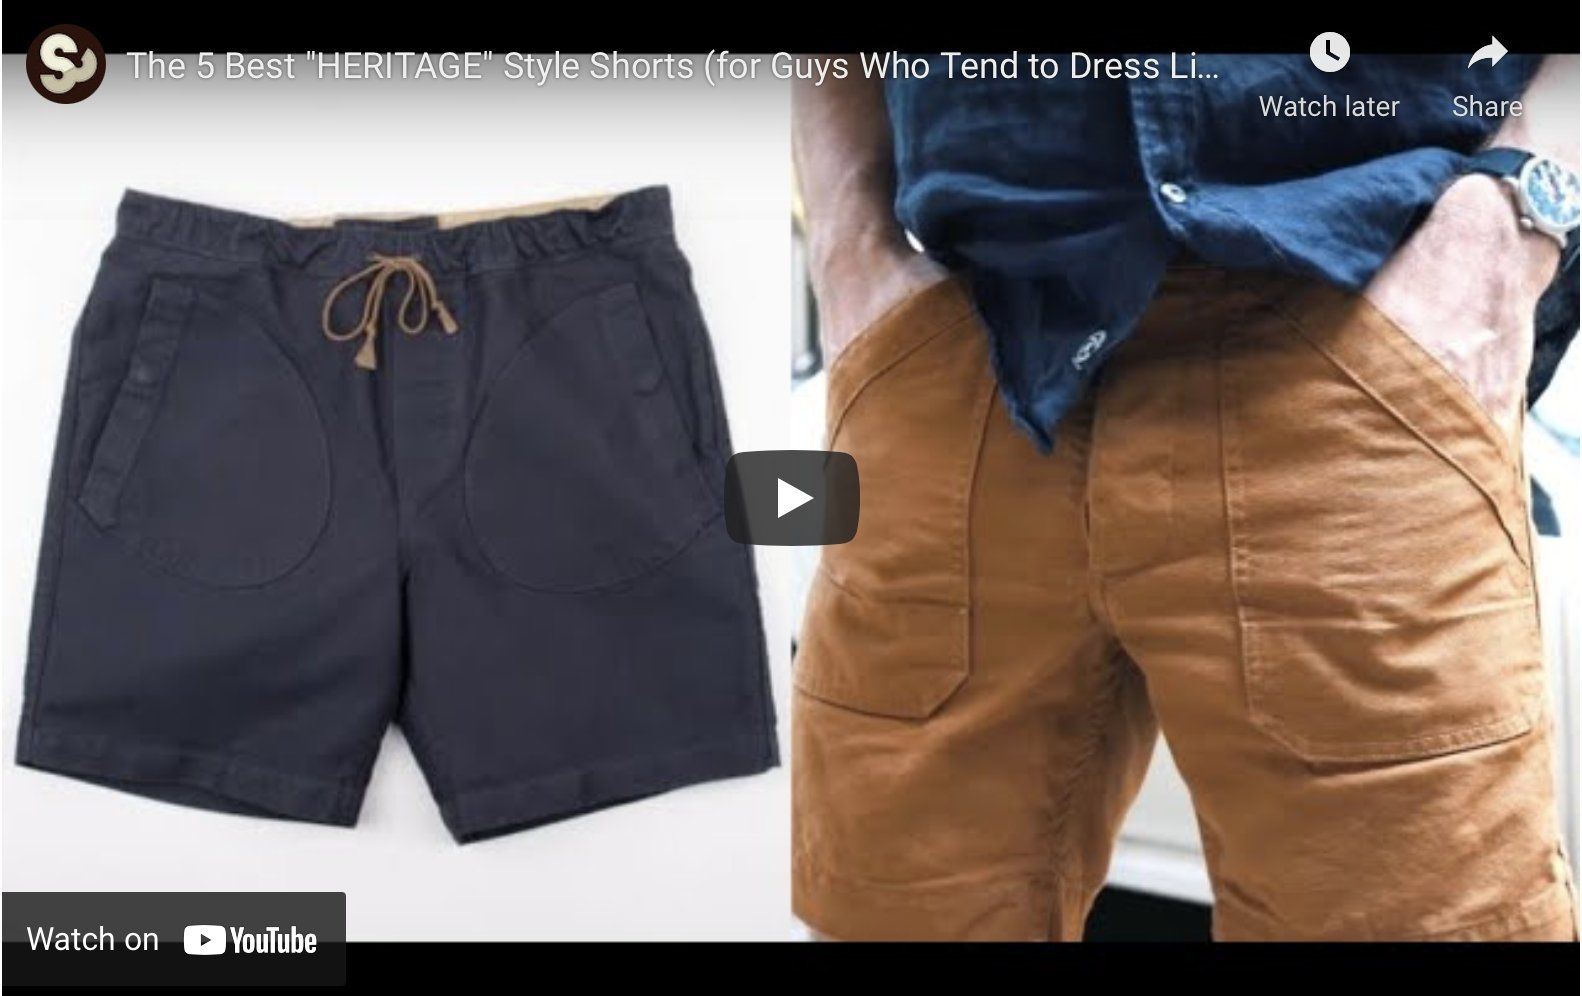 Stridewise.com Best "HERITAGE" Style Shorts - grown&sewn